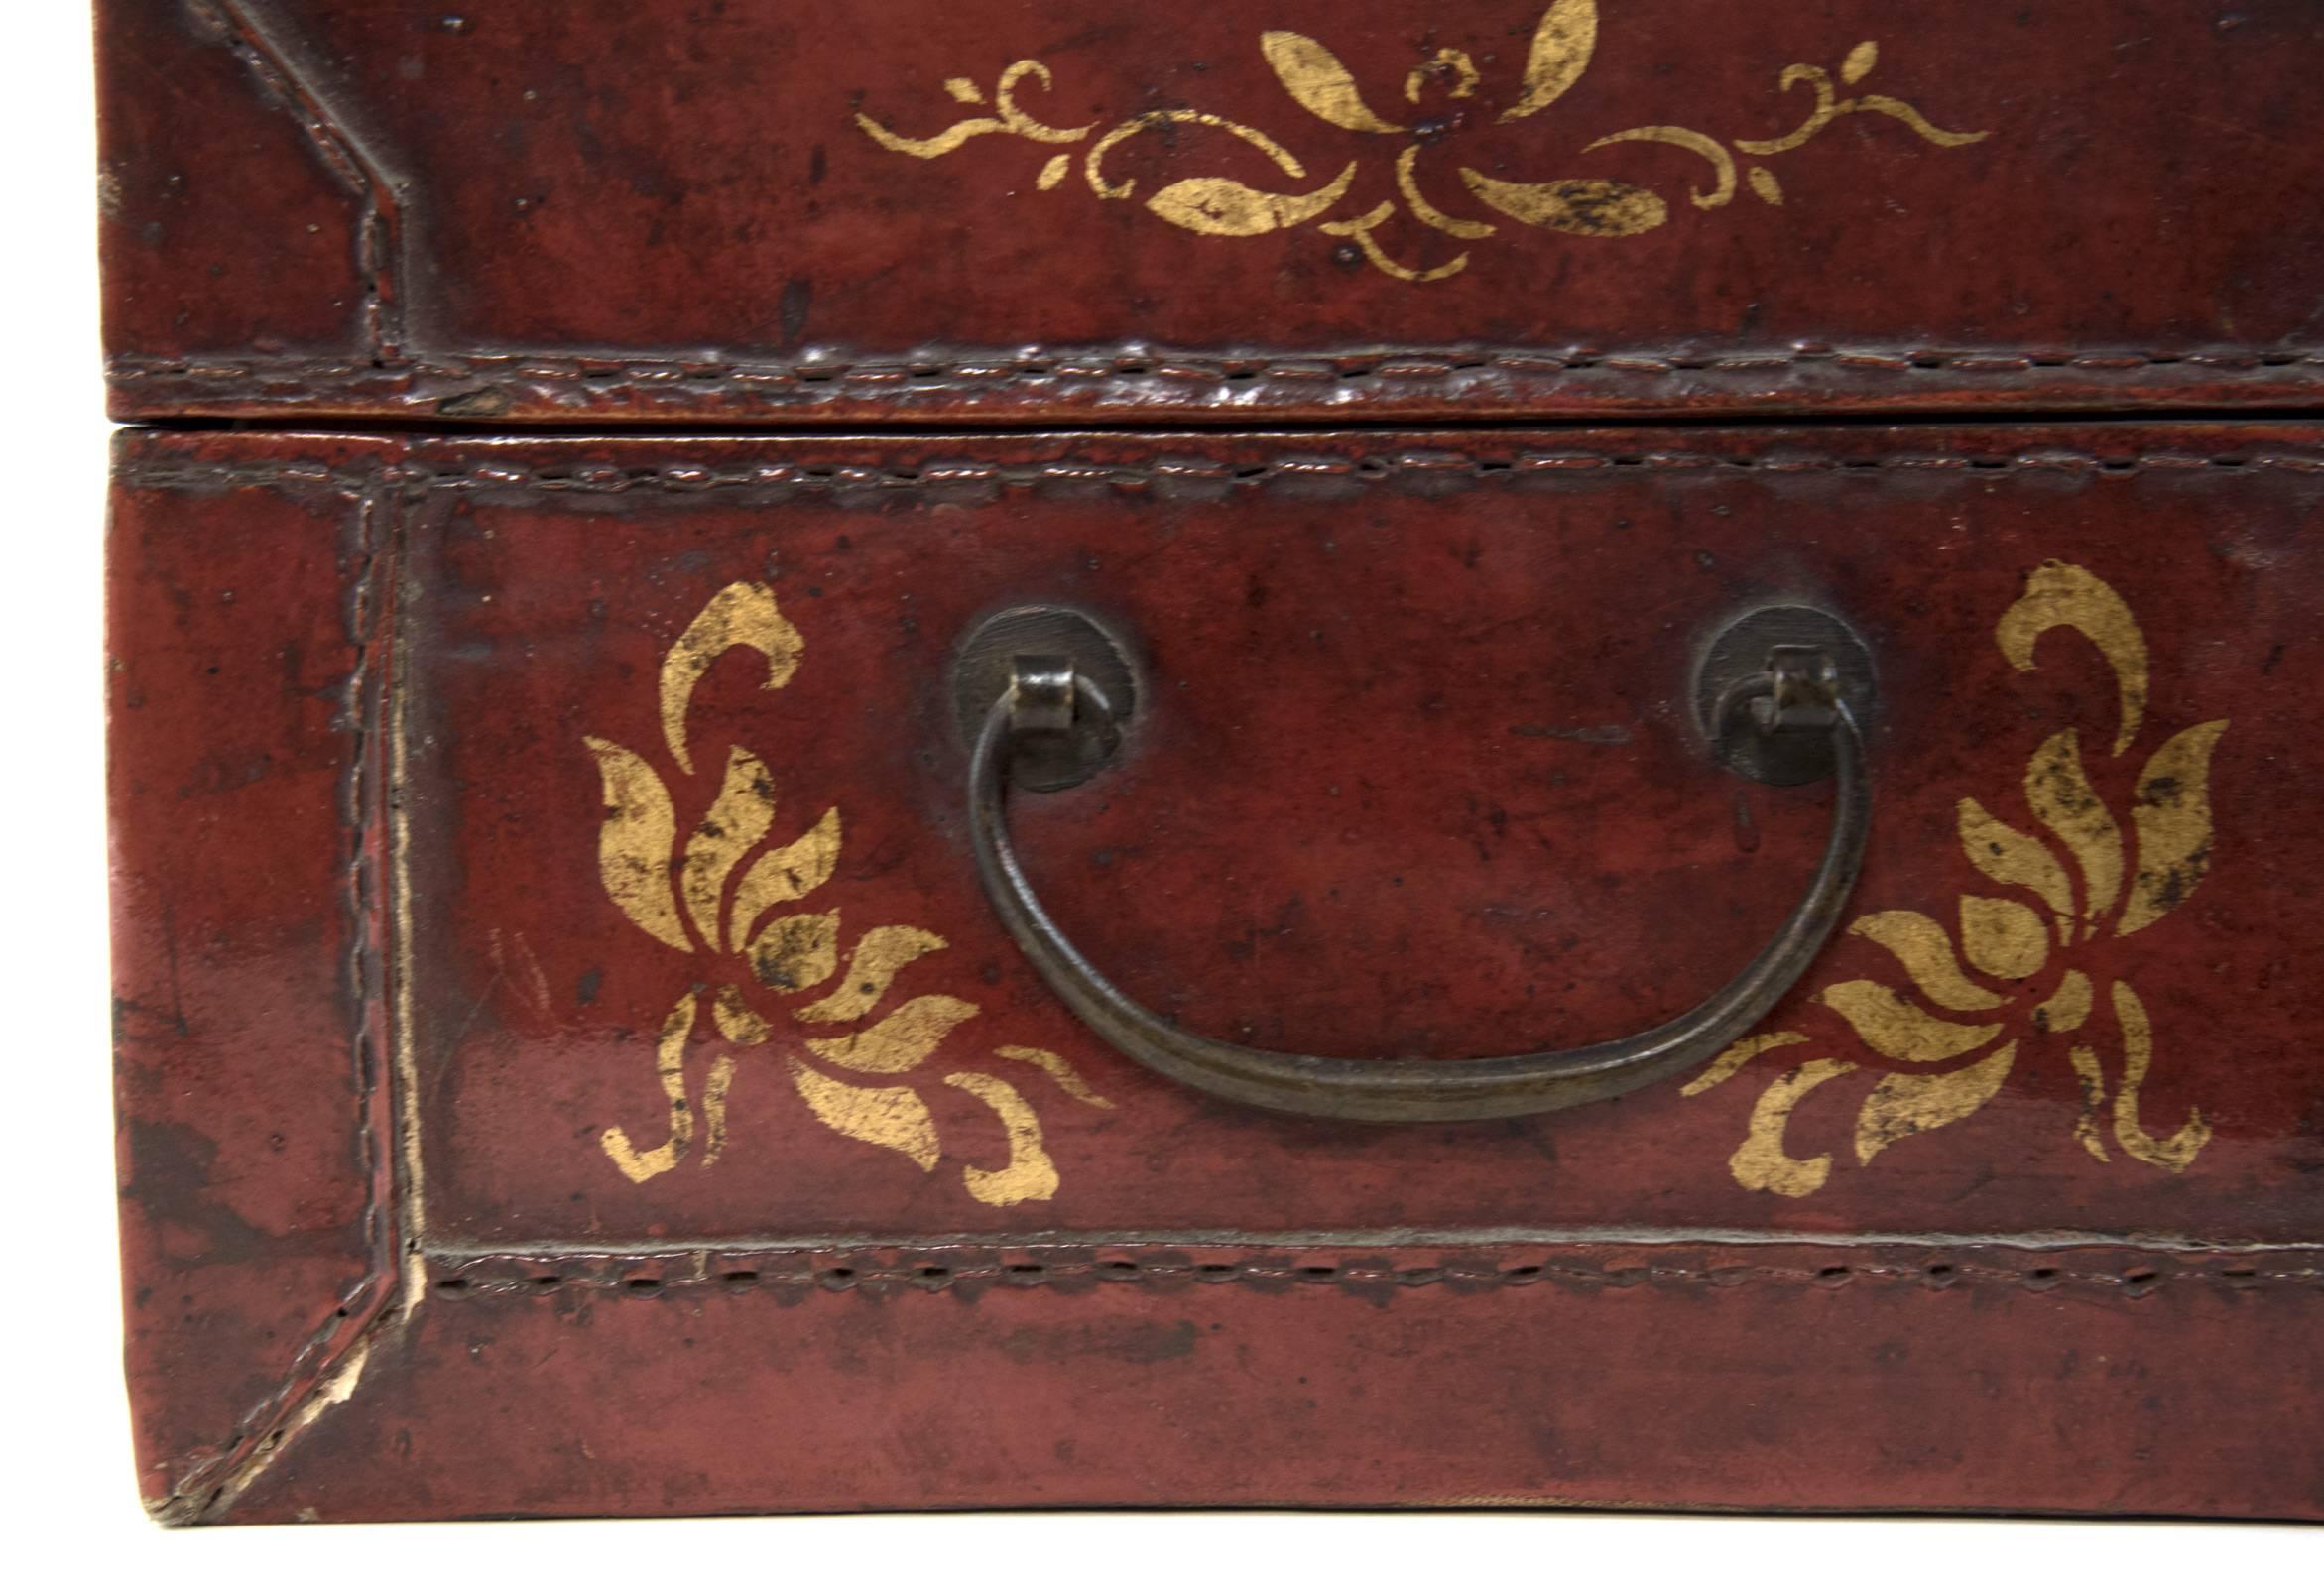 19th Century Chinese Red Leather Box with Gold-Stencil Foliate Ornamentation